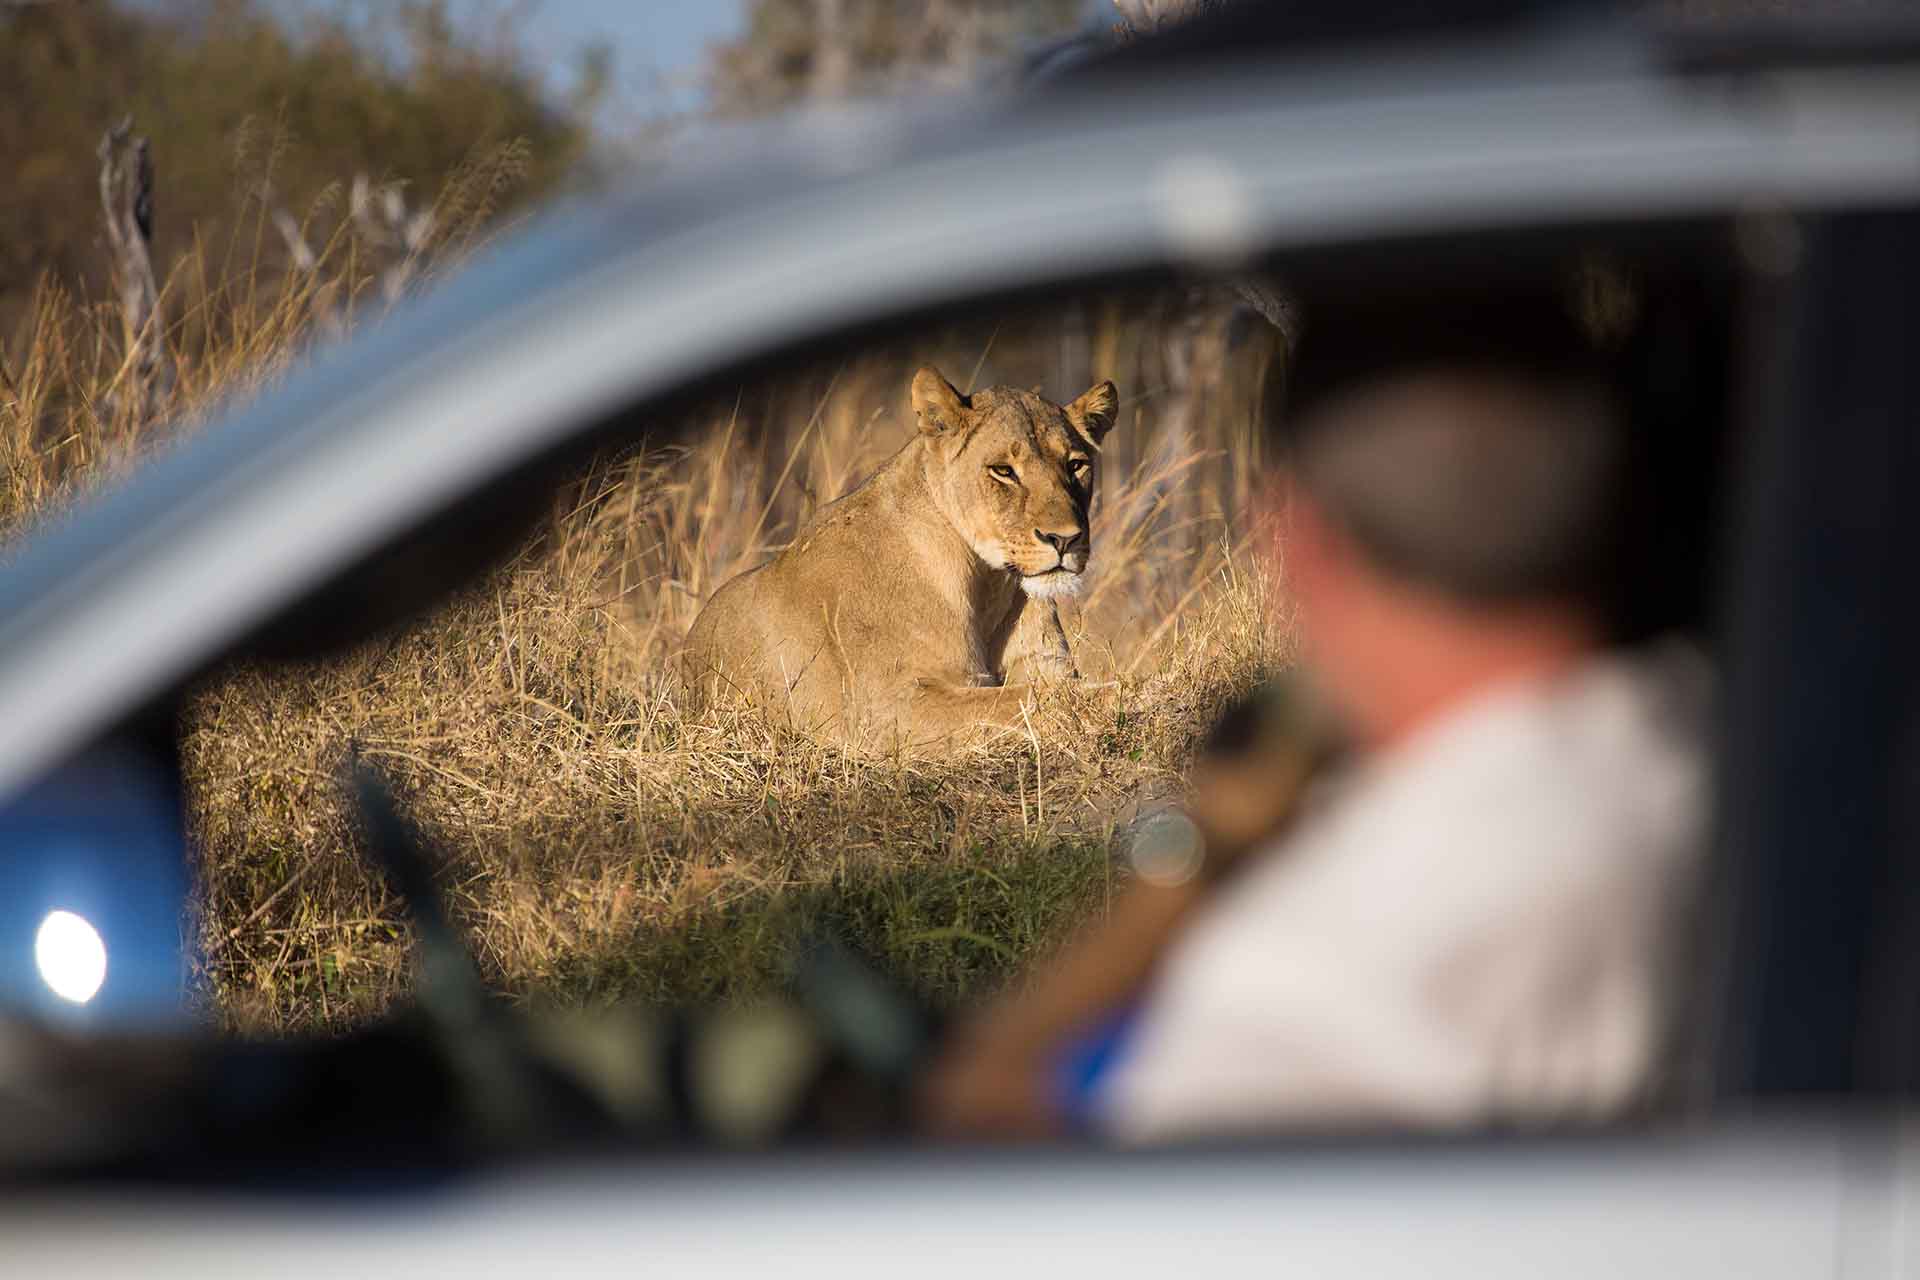 An out-of-focus tourist watching an in-focus lioness resting on a rise in dry grass through a car window at Hwange National Park, Zimbabwe